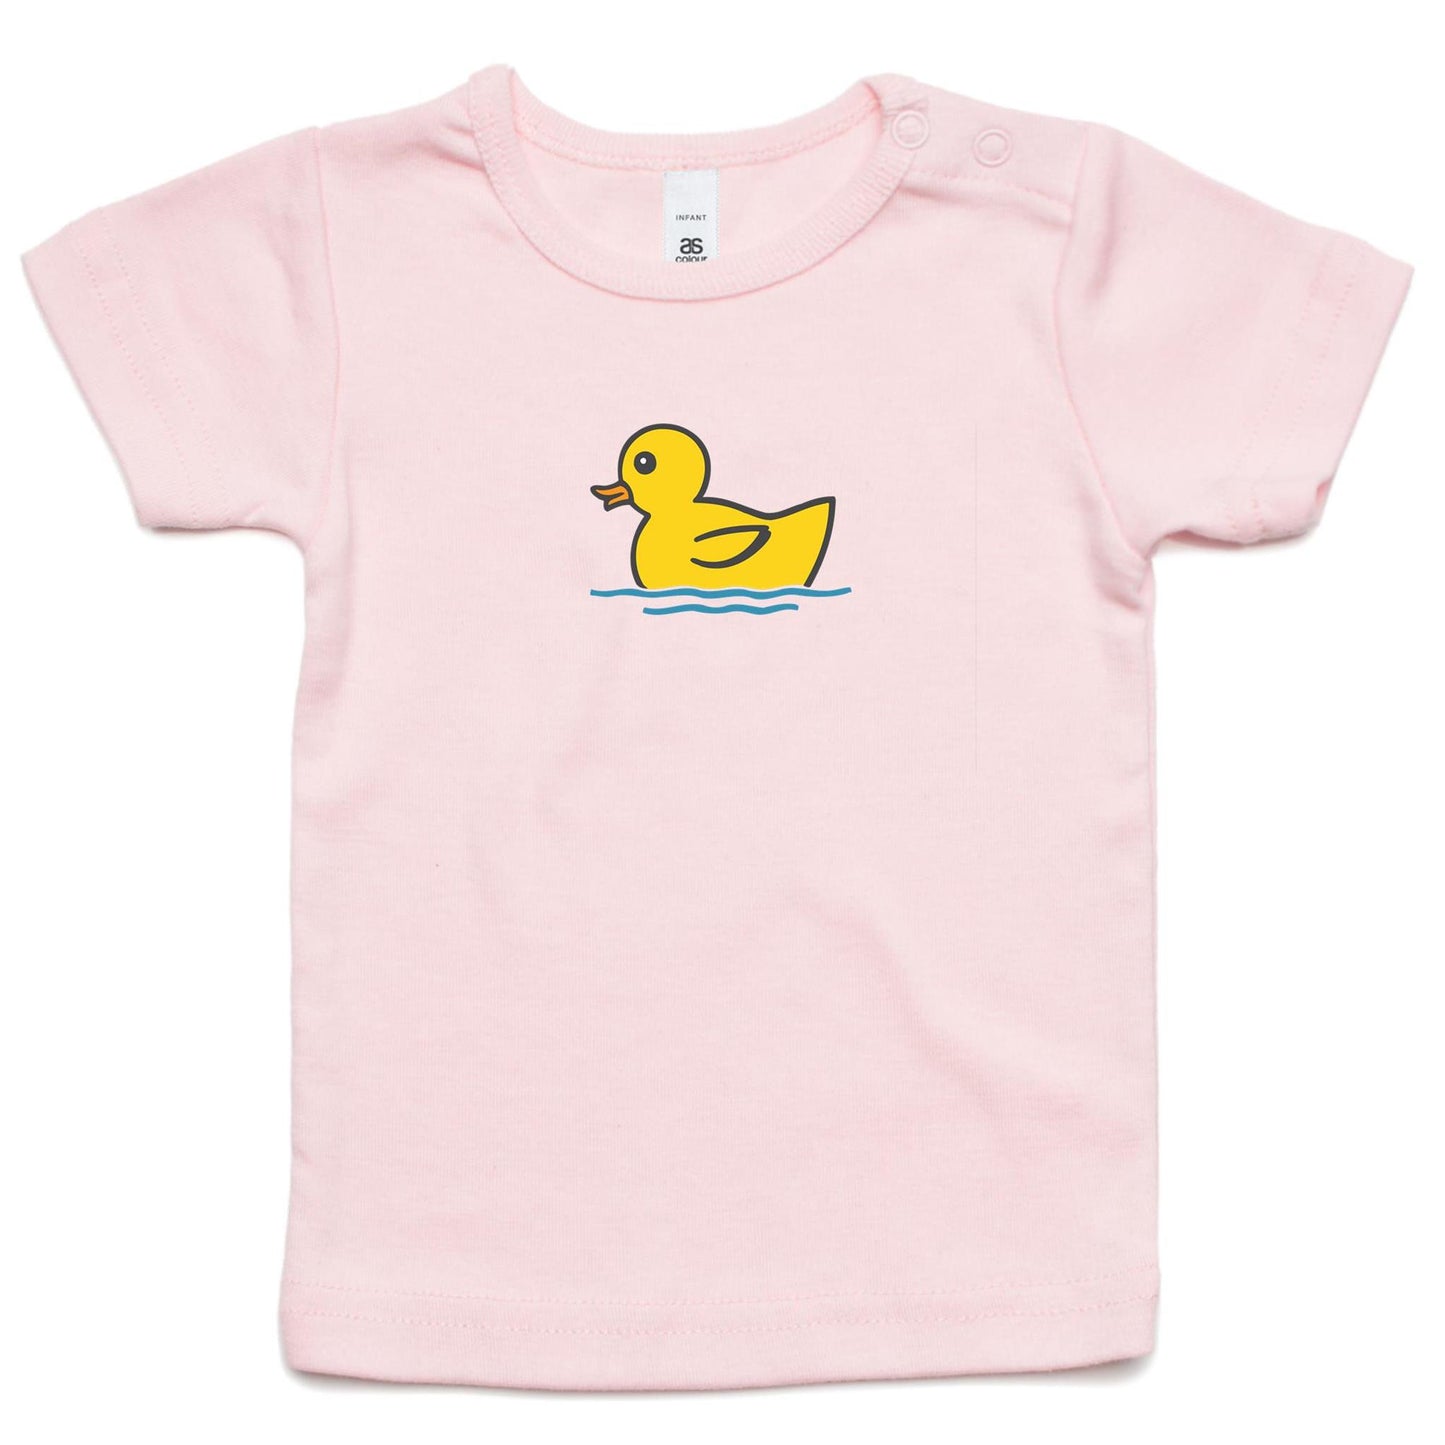 Rubber Duck T Shirts for Babies